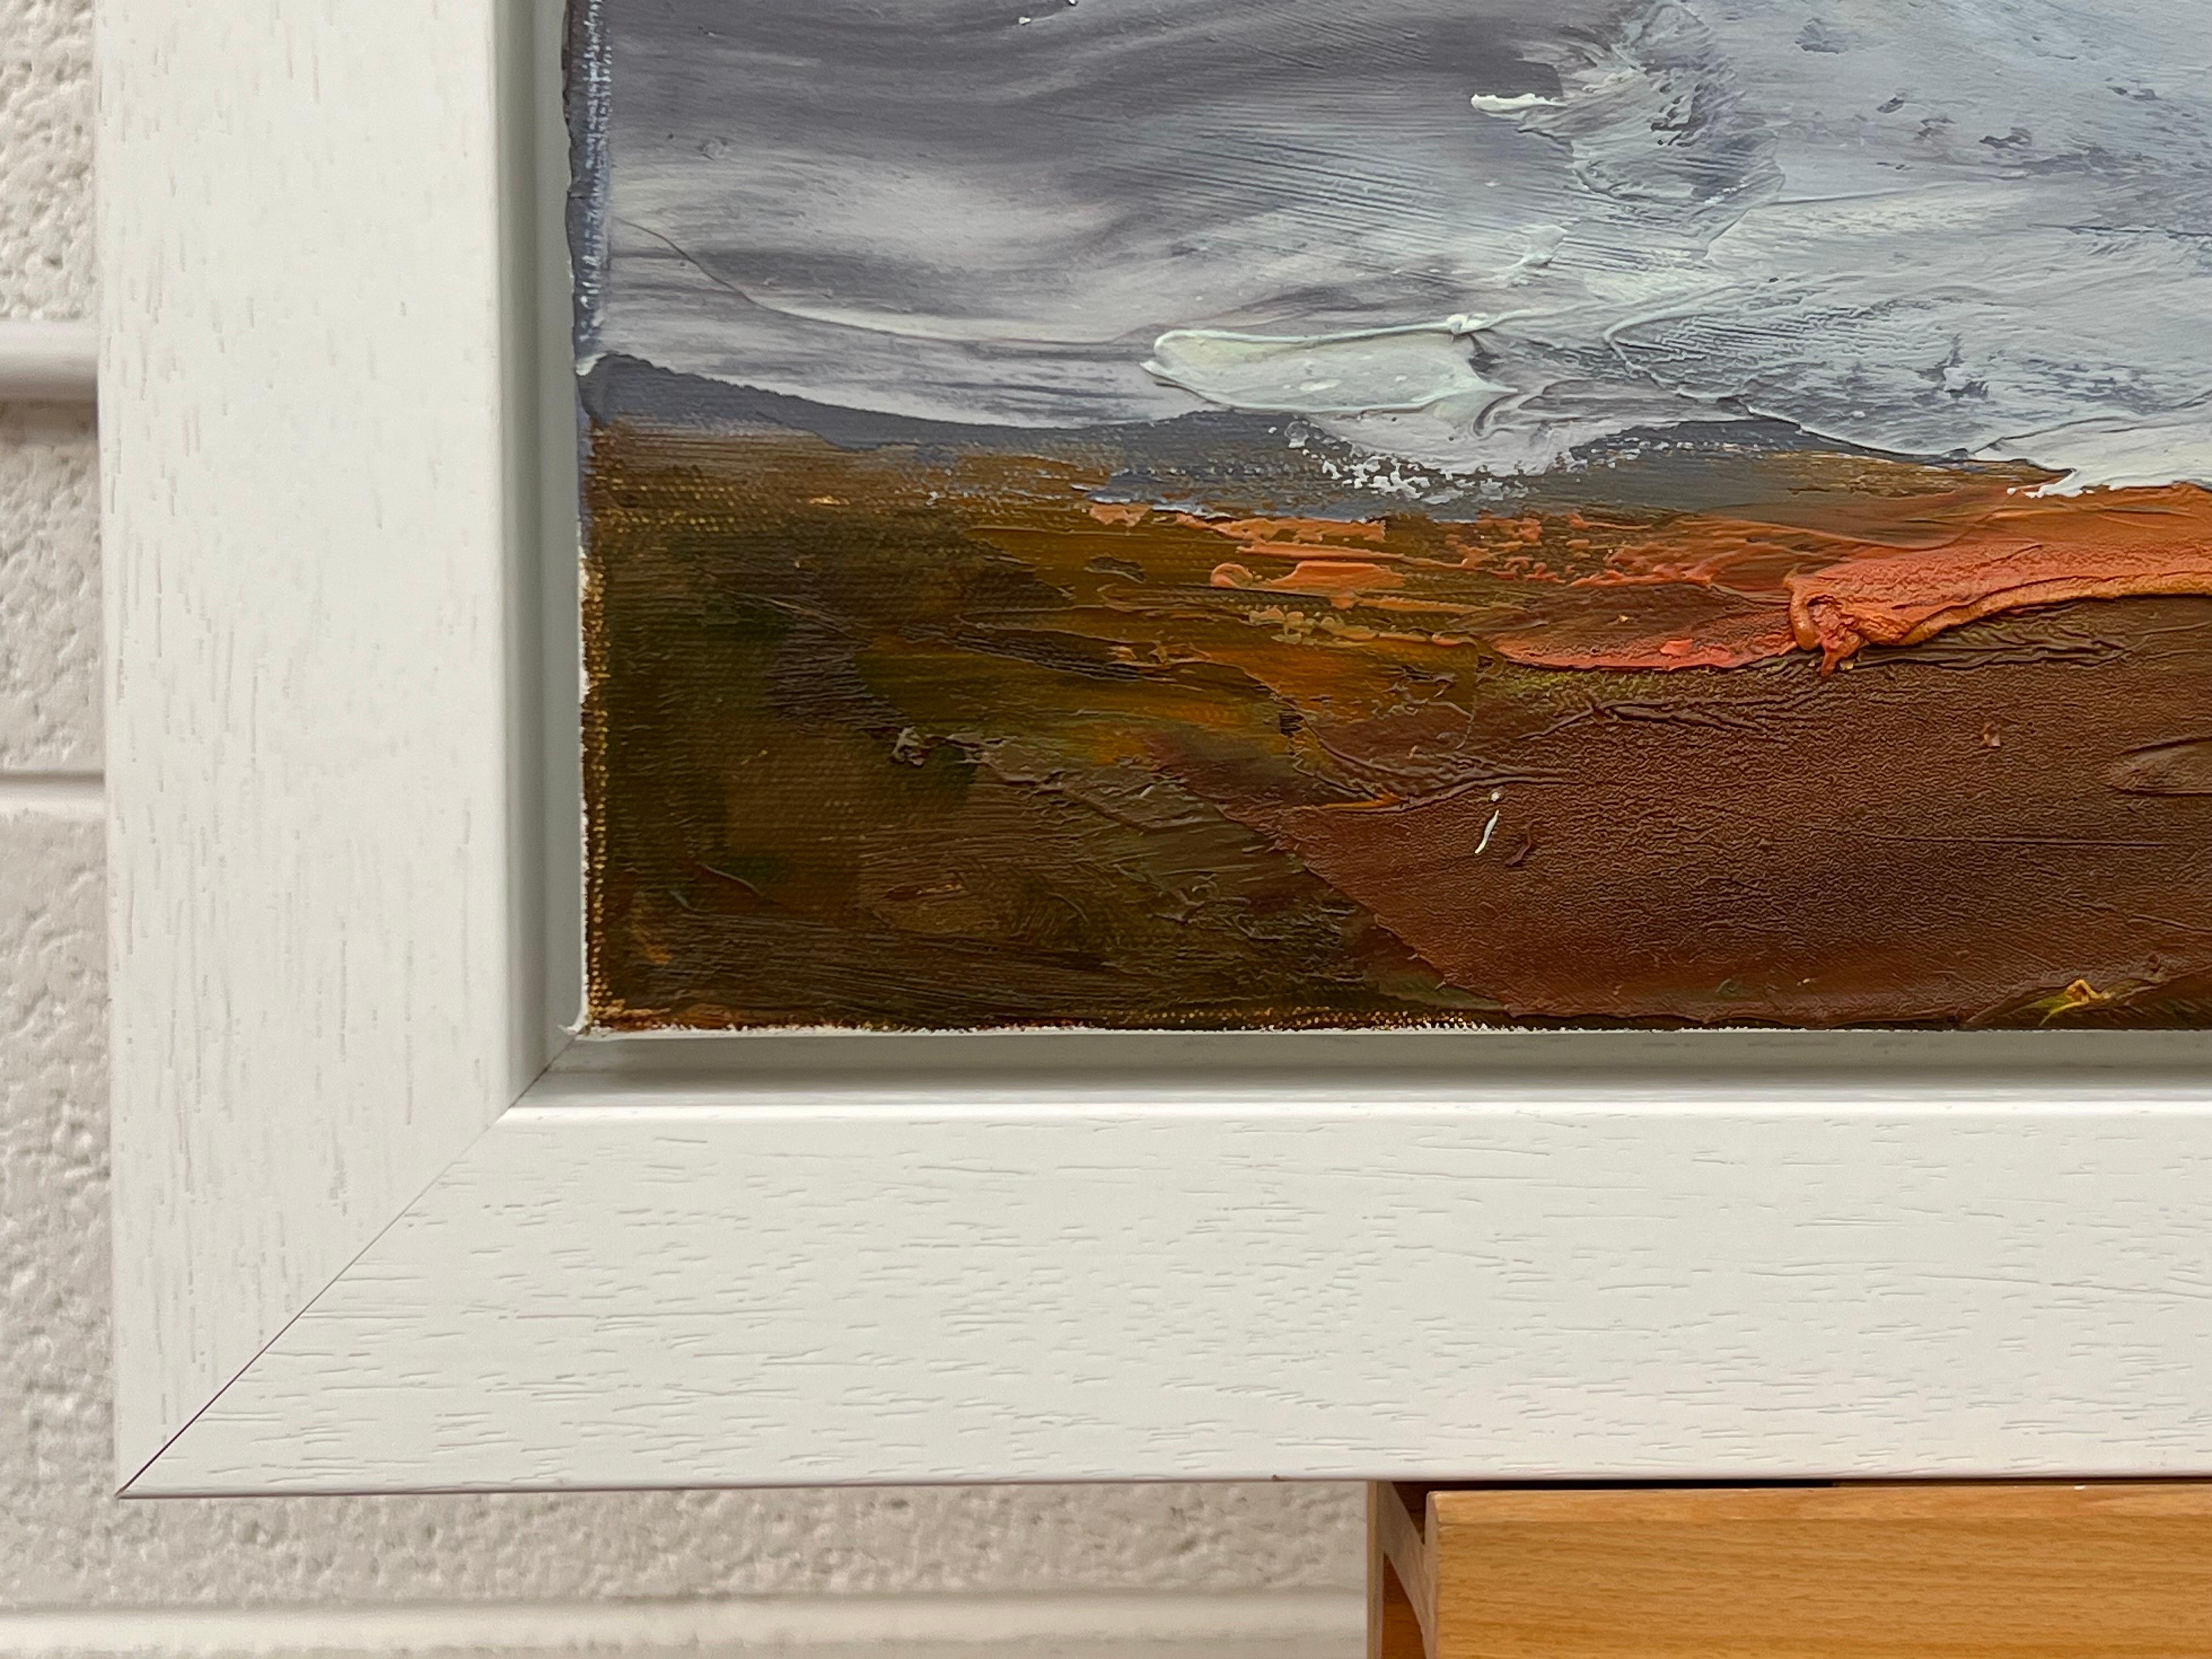 Impasto Oil Painting of a Moorland in the English Countryside by British Landscape Artist. Original on Canvas. Expressive and atmospheric depiction of a stormy.  

Art measures 26 x 19 inches
Frame measures 32 x 25 inches

Colin Halliday is a highly